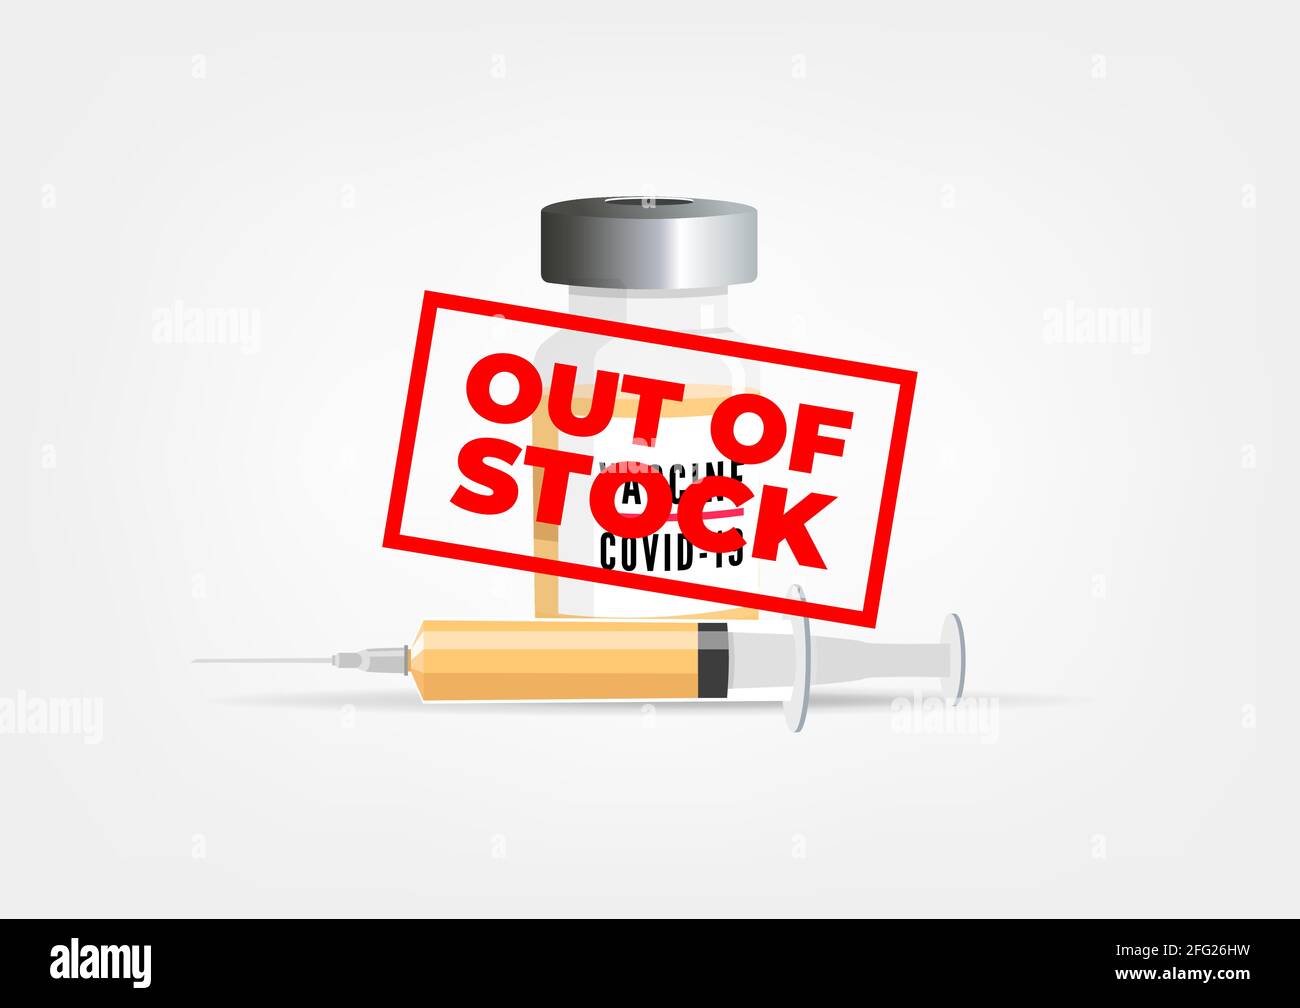 COVID-19 Vaccine out of stock. Stock Vector